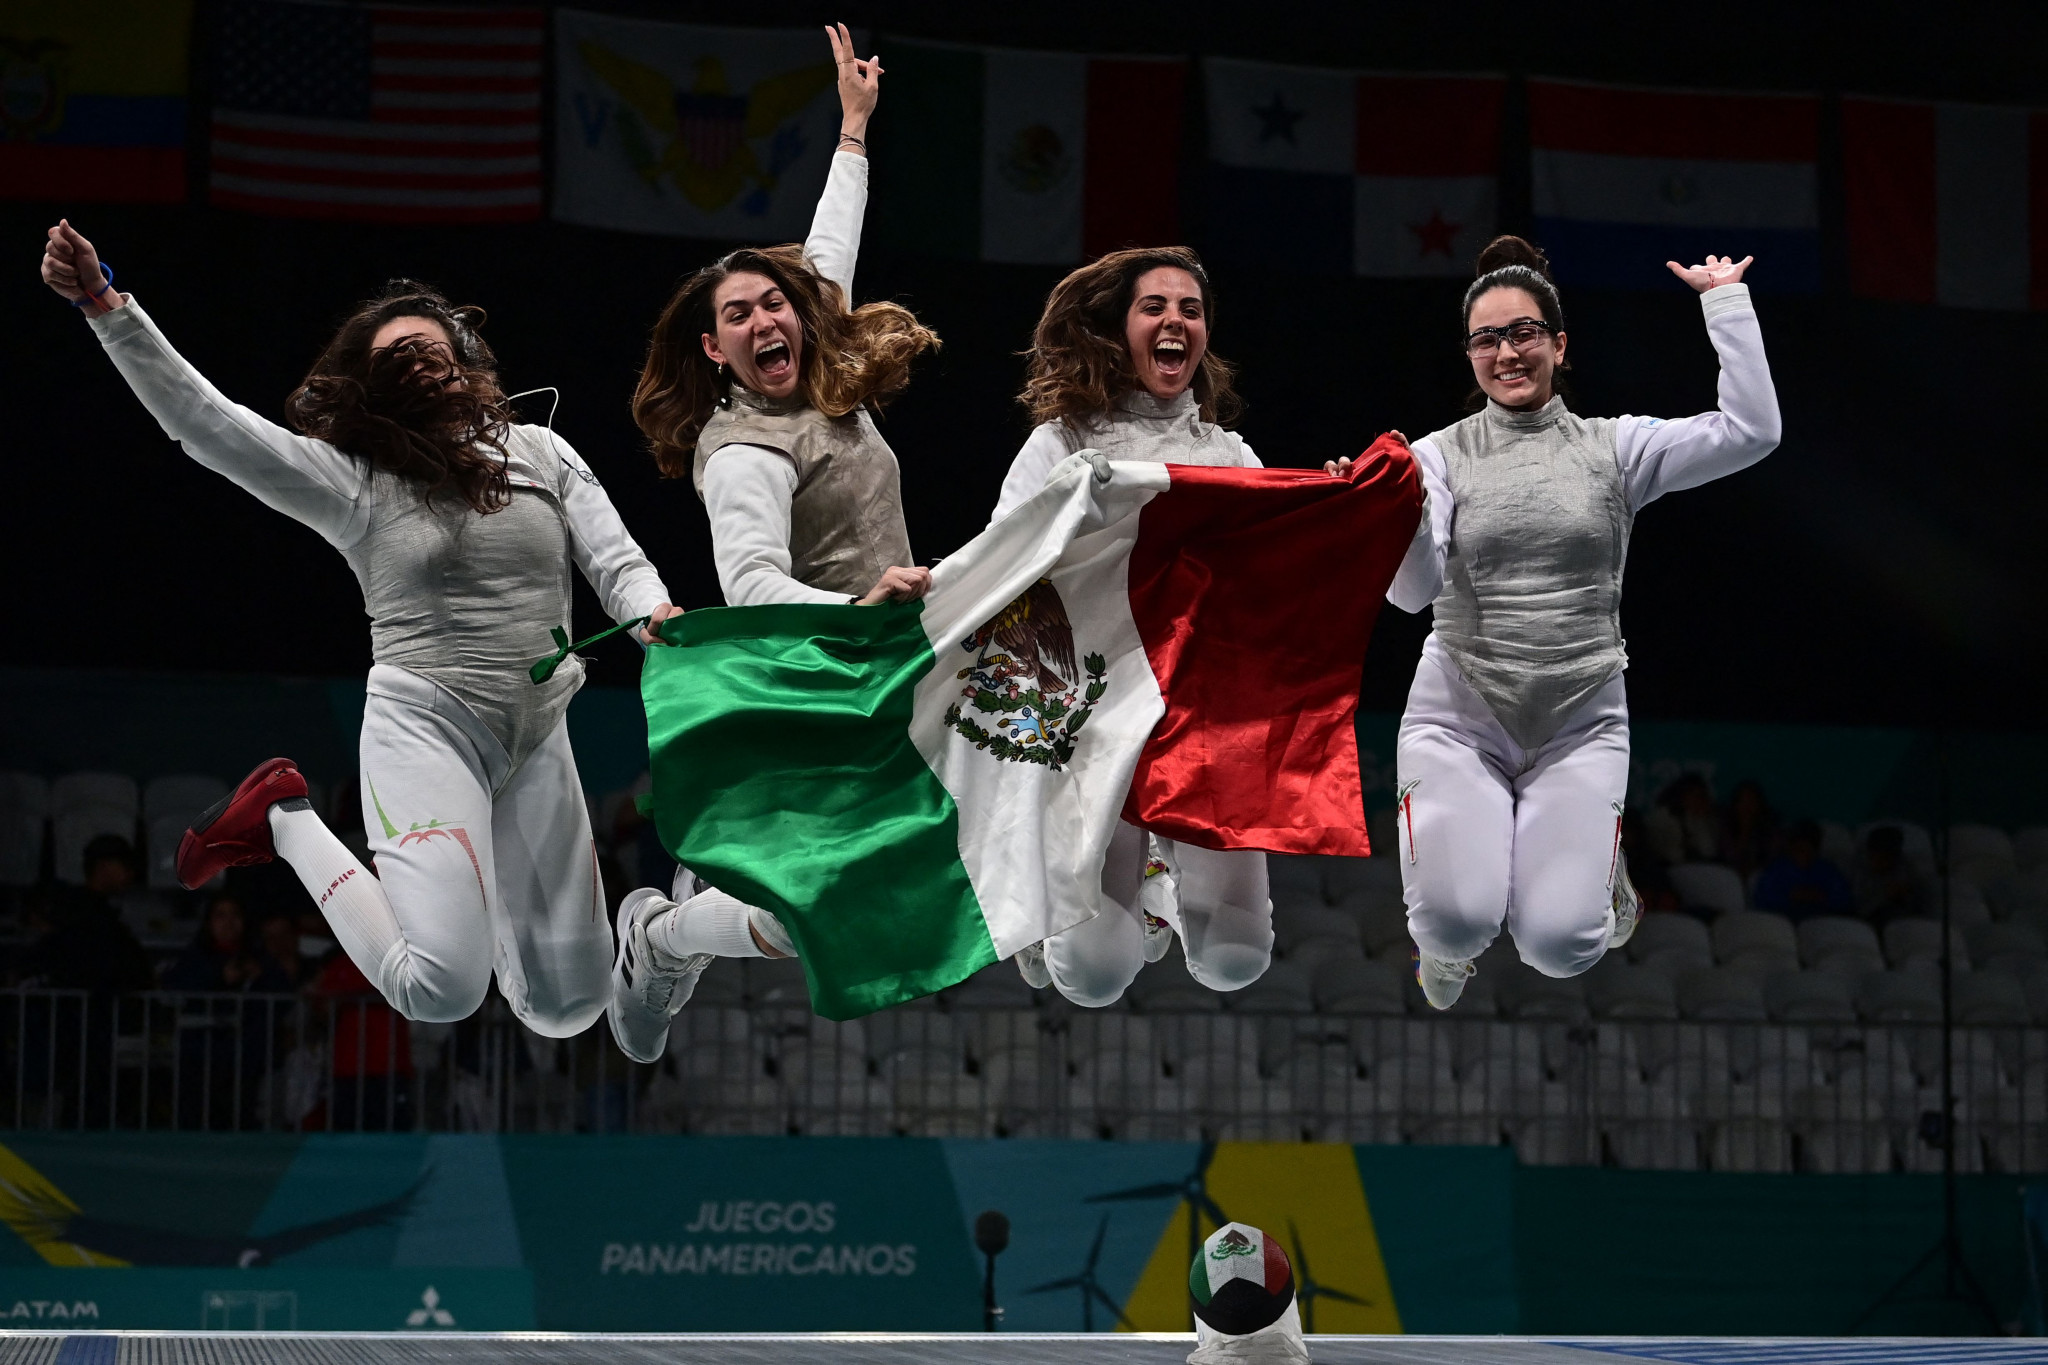 México secures a historic Olympic team berth in rhythmic gymnastics after winning silver at the Pan American Games